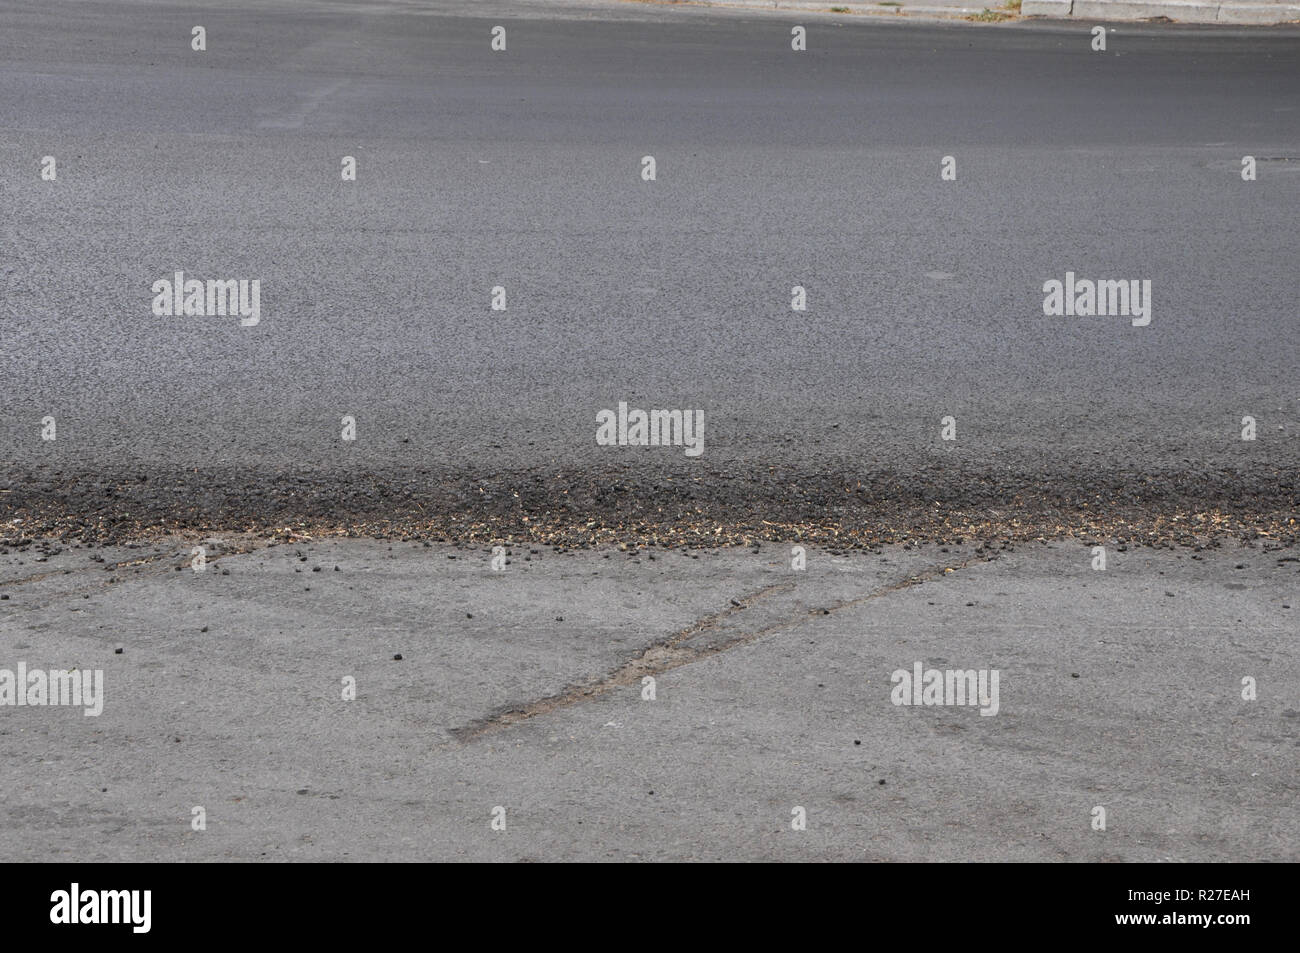 Partly repaired roadway with a horizontal rim between the newly laid asphalt concrete in the upper side and the older area below. Stock Photo